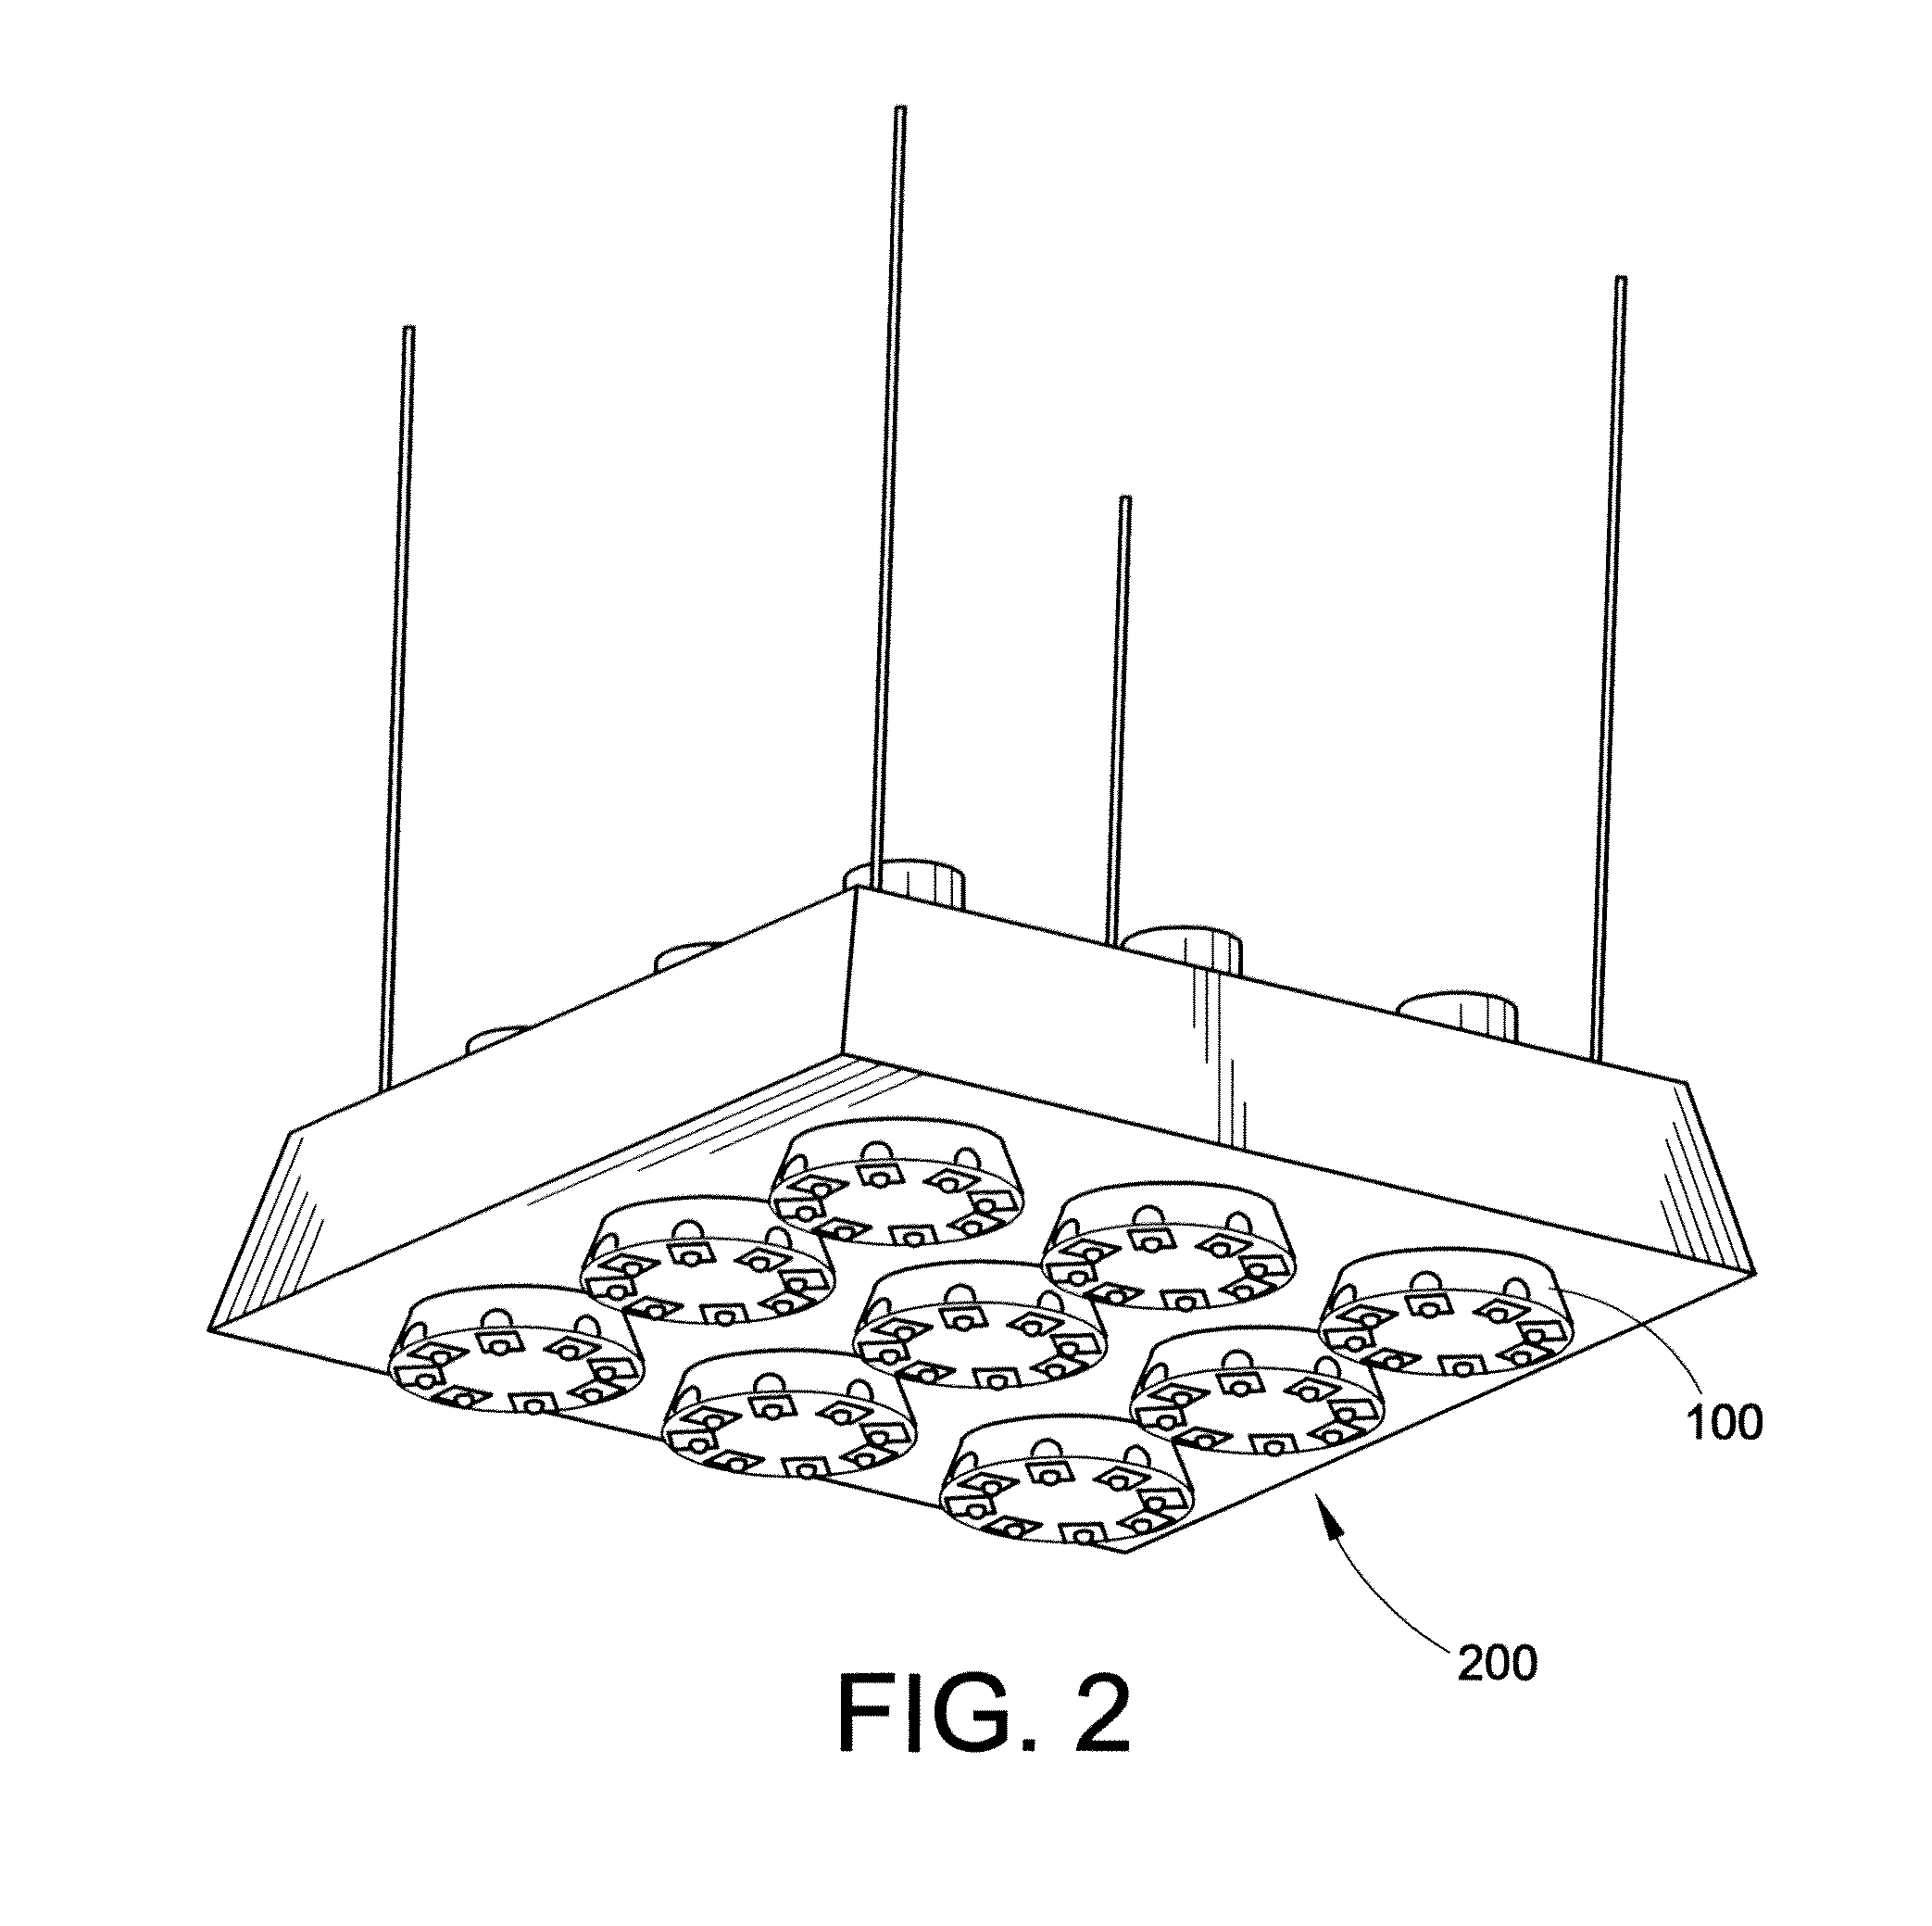 Device with combined features of lighting and air purification